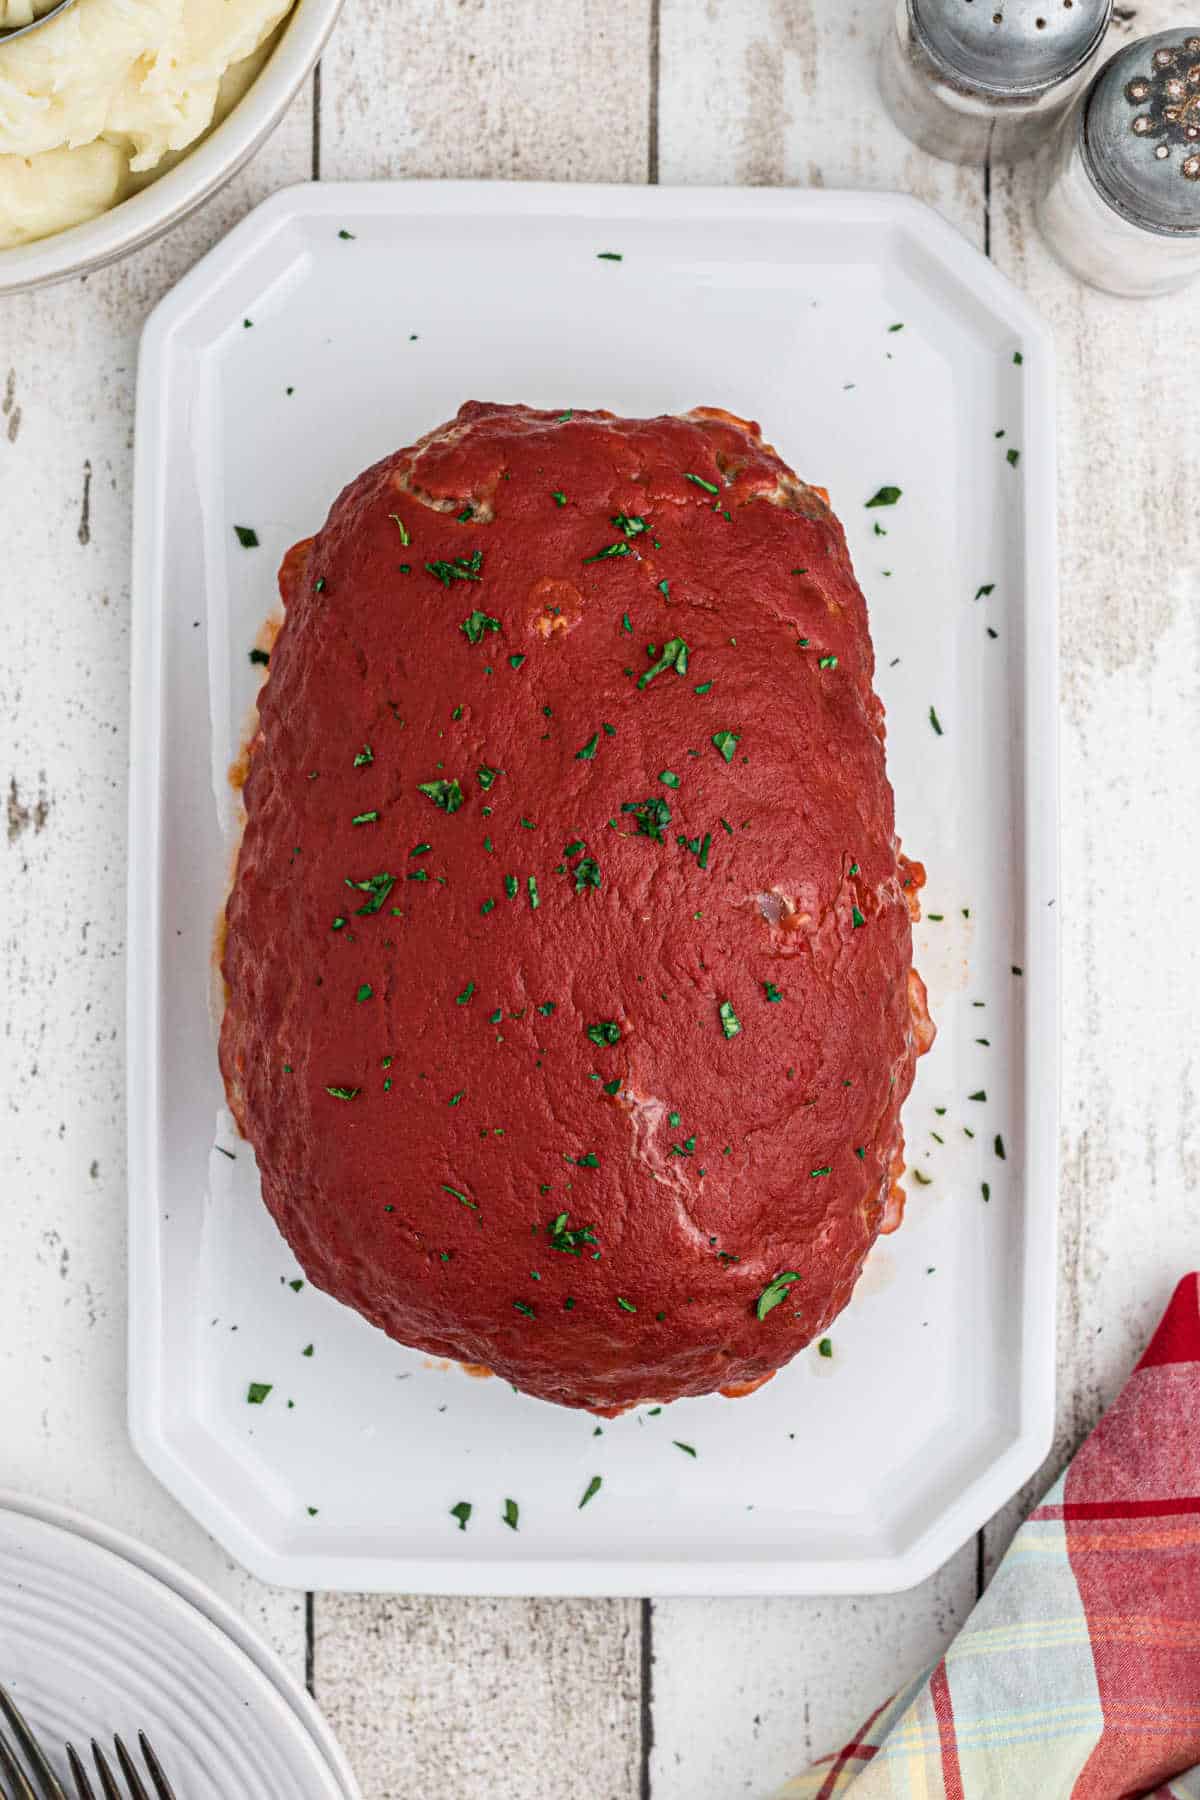 Overhead shot of a meatloaf with tomato sauce on top.